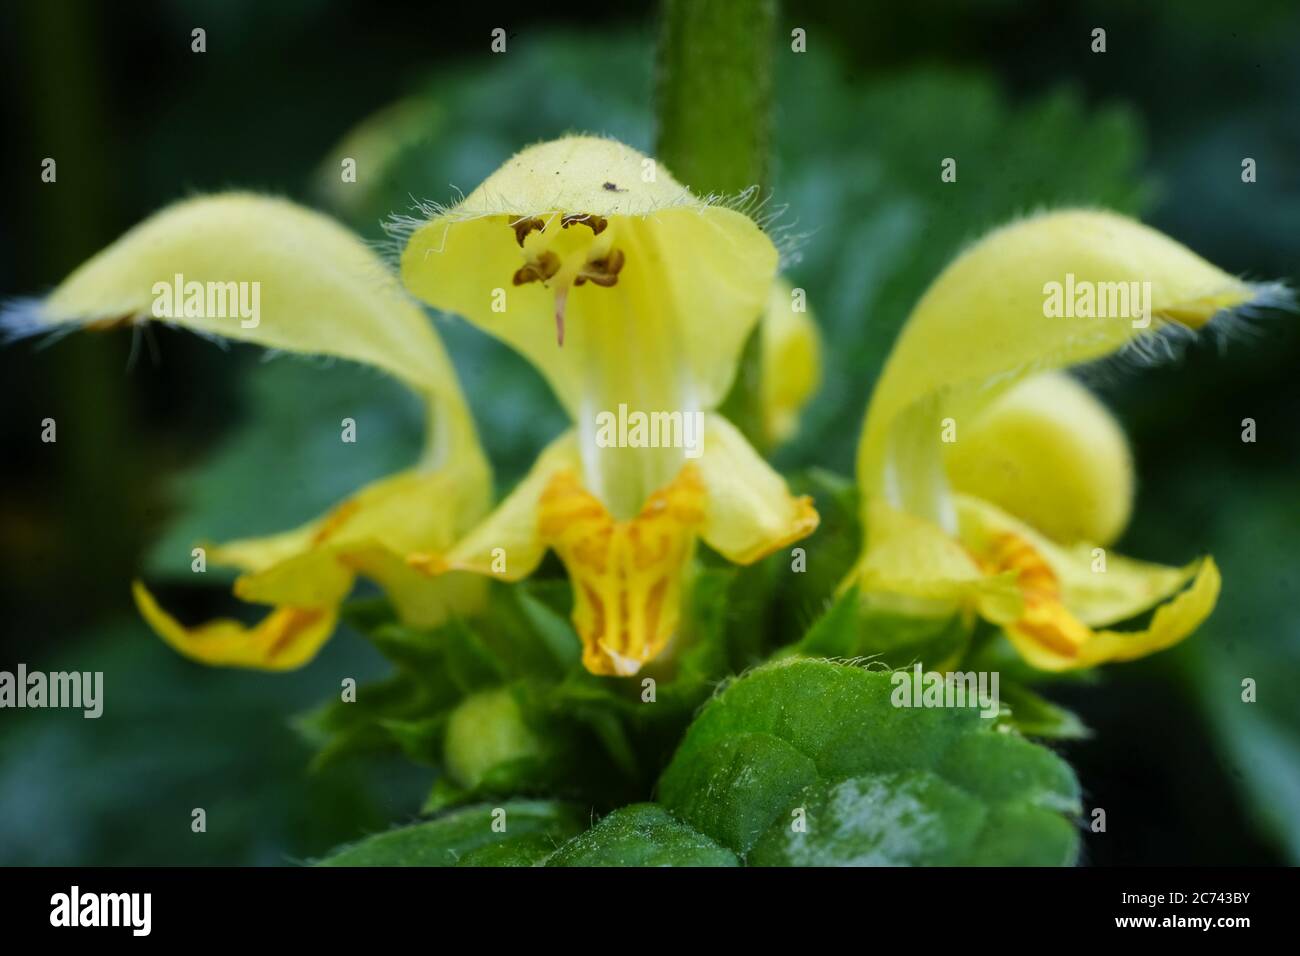 Close up of Yellow Lamium or dead-nettles flowers in a garden. The fine outgrowths or hairs, fine outgrowths on the buds and flowers are clearly visib Stock Photo